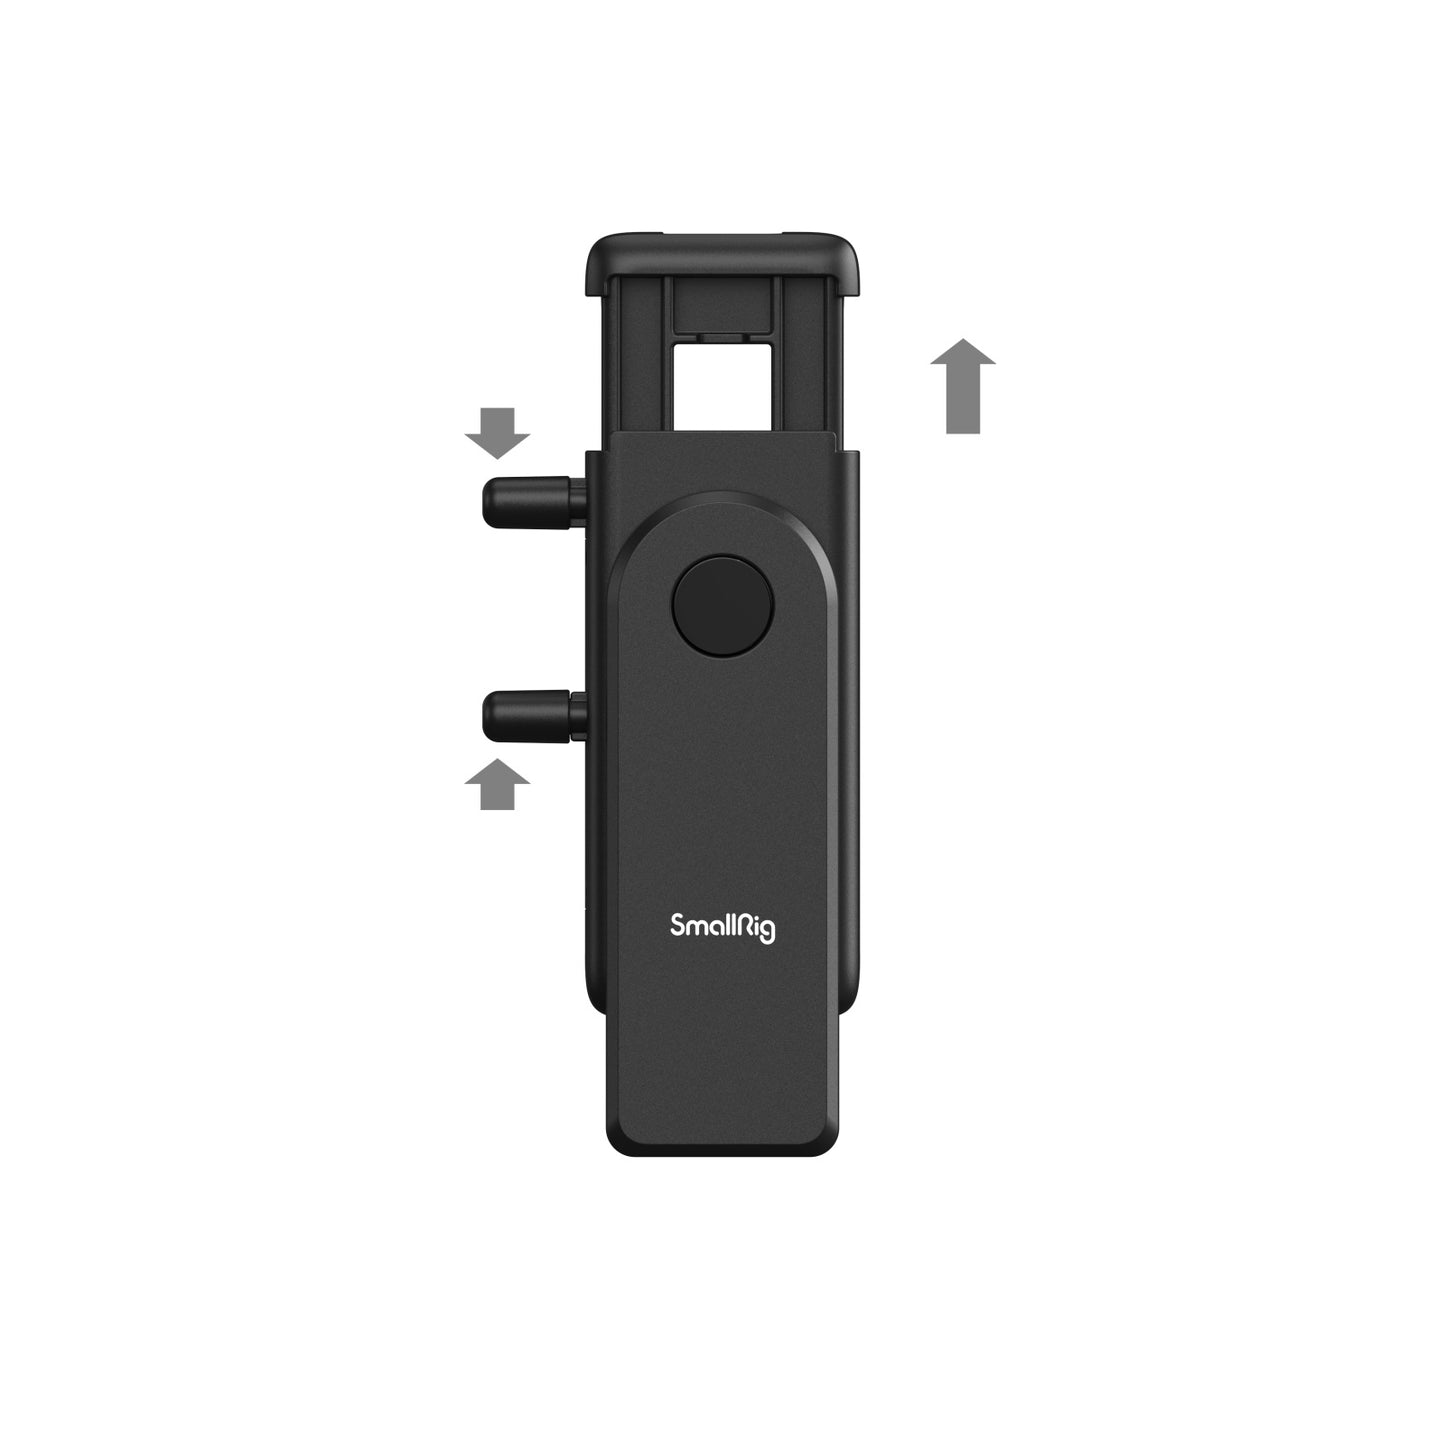 SmallRig Quick Loading Smartphone Holder with Dual Cold Shoe Mounts & 1/4"-20 Tripod Thread Attachment Hole for iPhone & Android Phone Photography | 4366